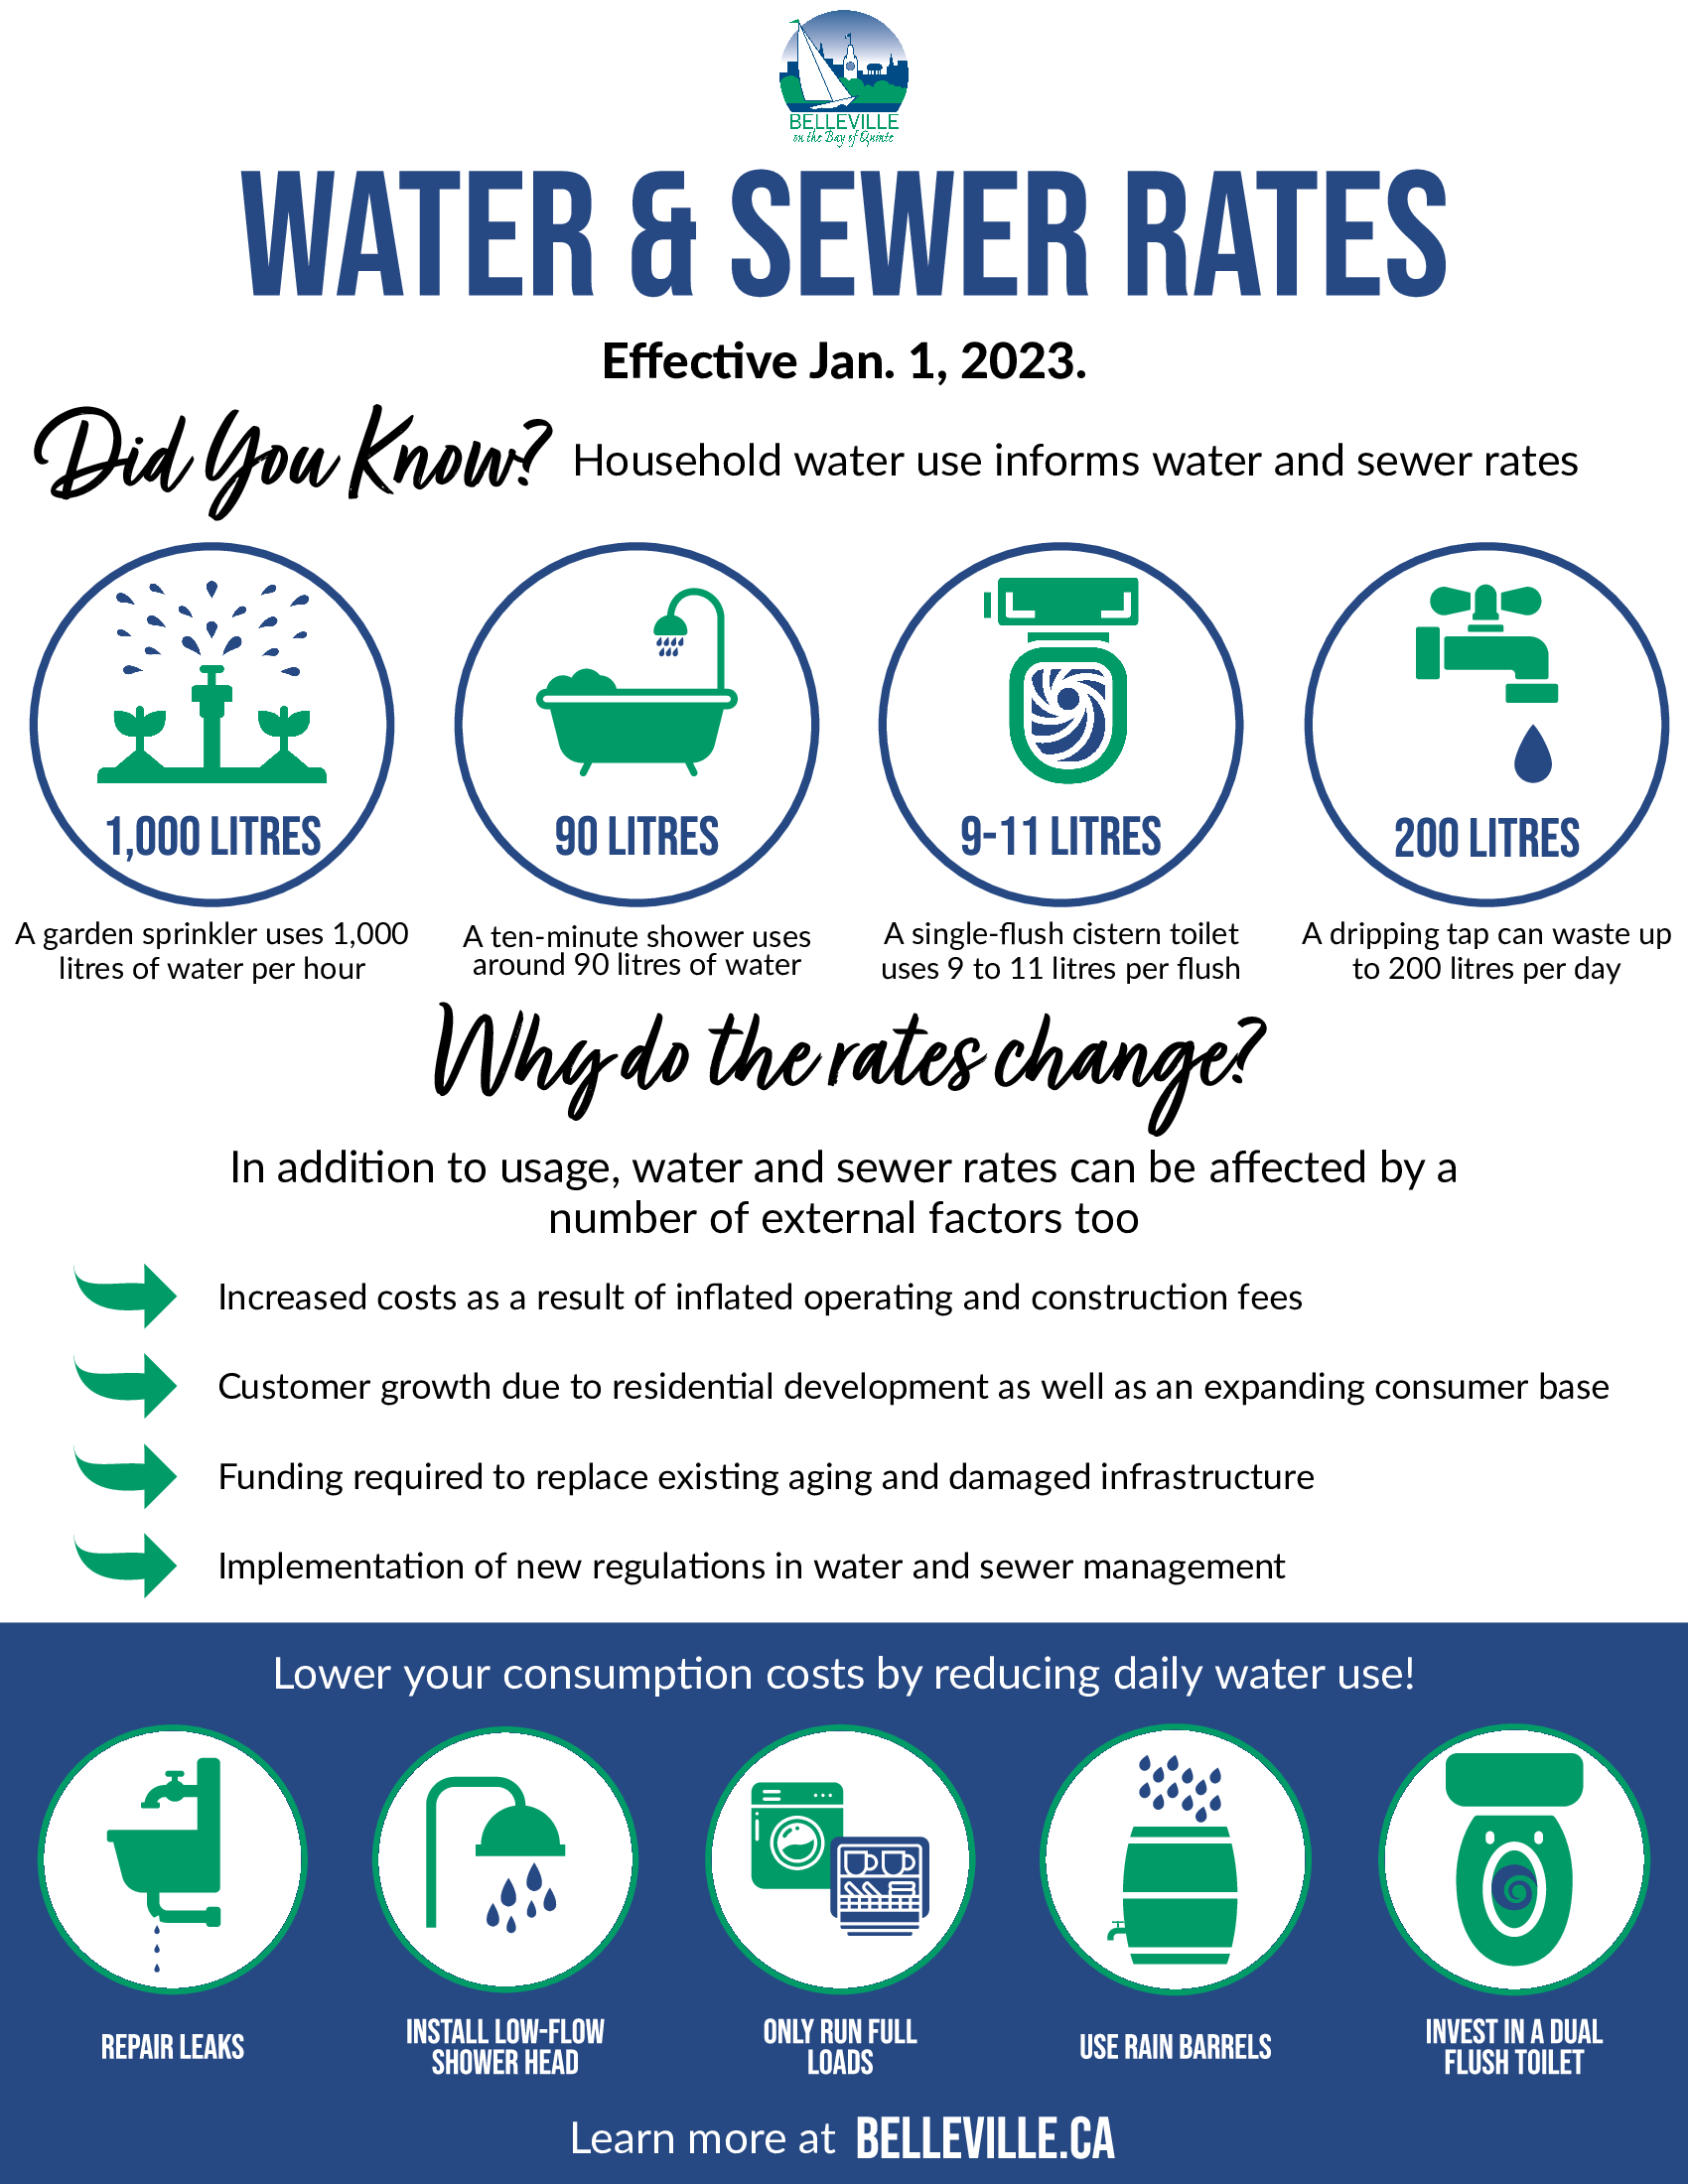 An infographic depicting water use rates and tips taken from the water and sewer rates brochure